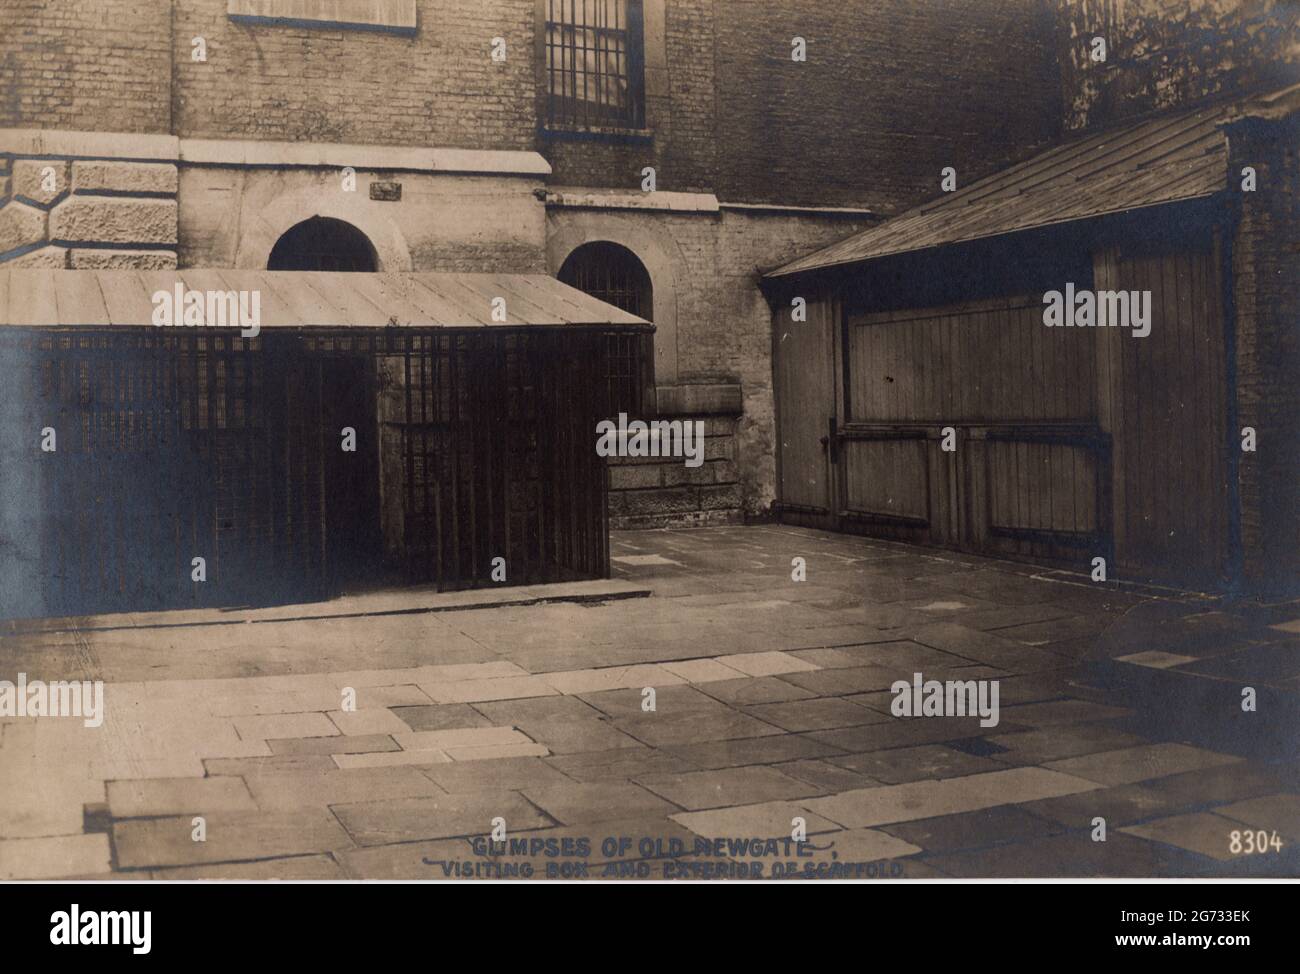 Glimpses of Old Newgate - Visiting Box and Exterior of Scaffold, c1900. Newgate Prison, dating back to the 12th century, was originally located at the site of Newgate, a gate in the Roman wall around the city of London. Public hangings, of both men and women, took place outside the prison from 1783 and continued until 1868, when executions were carried out on gallows inside Newgate. In total, 1,169 people were executed - publicly or otherwise - at the prison. Many types of criminals were imprisoned at Newgate, and their offences varied from petty crime and theft, breaking and entering, highway Stock Photo